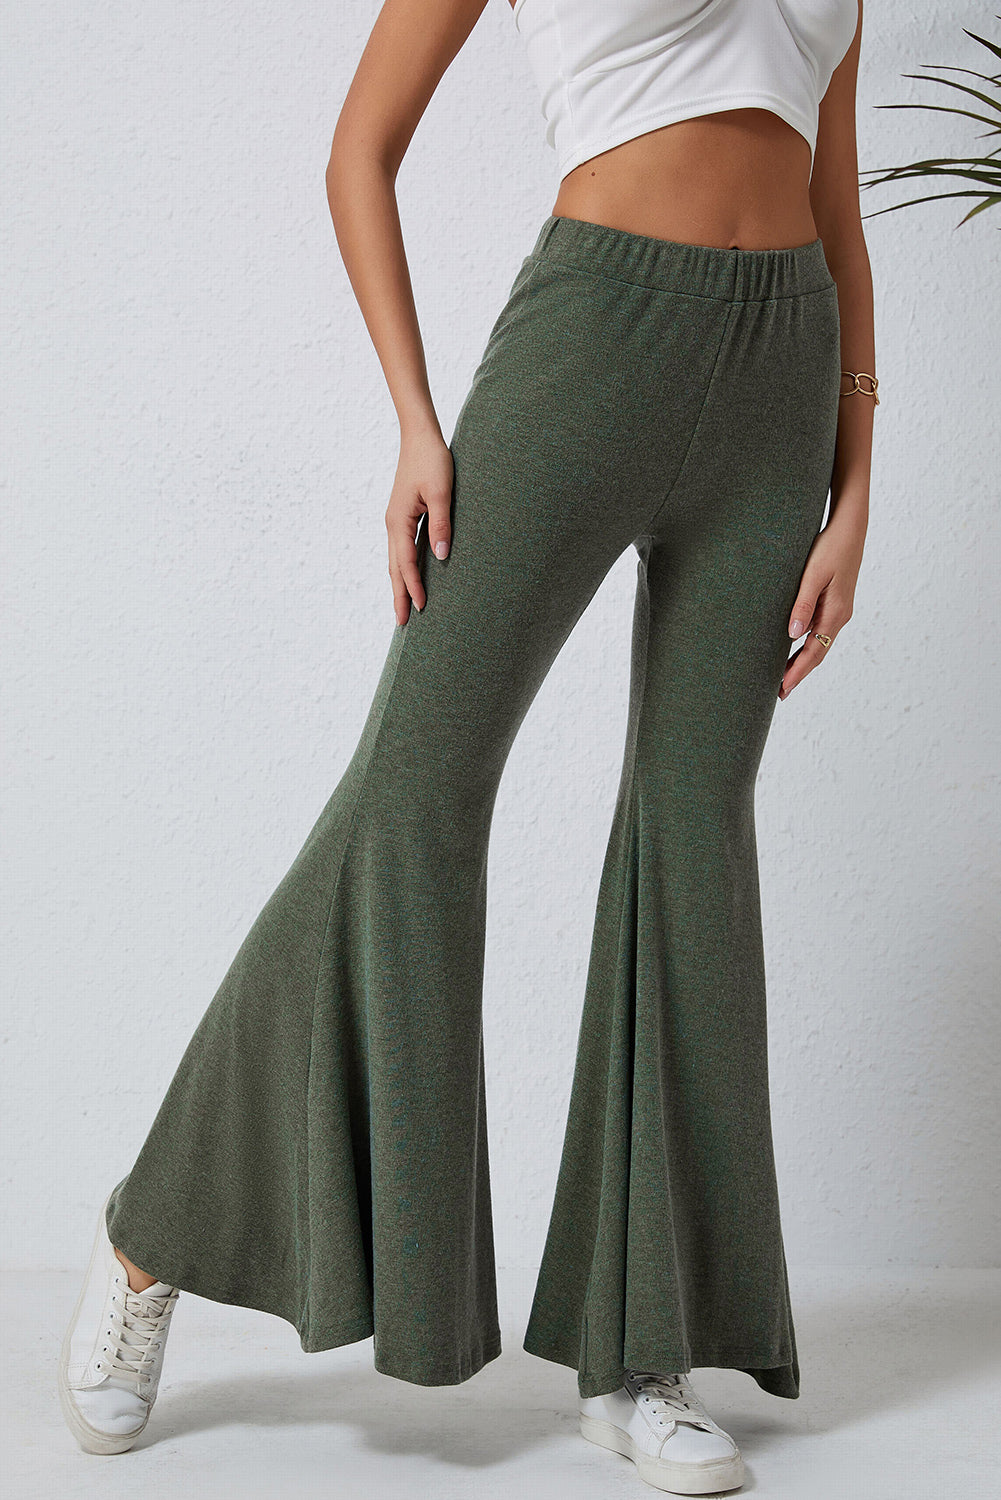 Green High Waist Fit and Flare Pants – Emmeline's Fashion